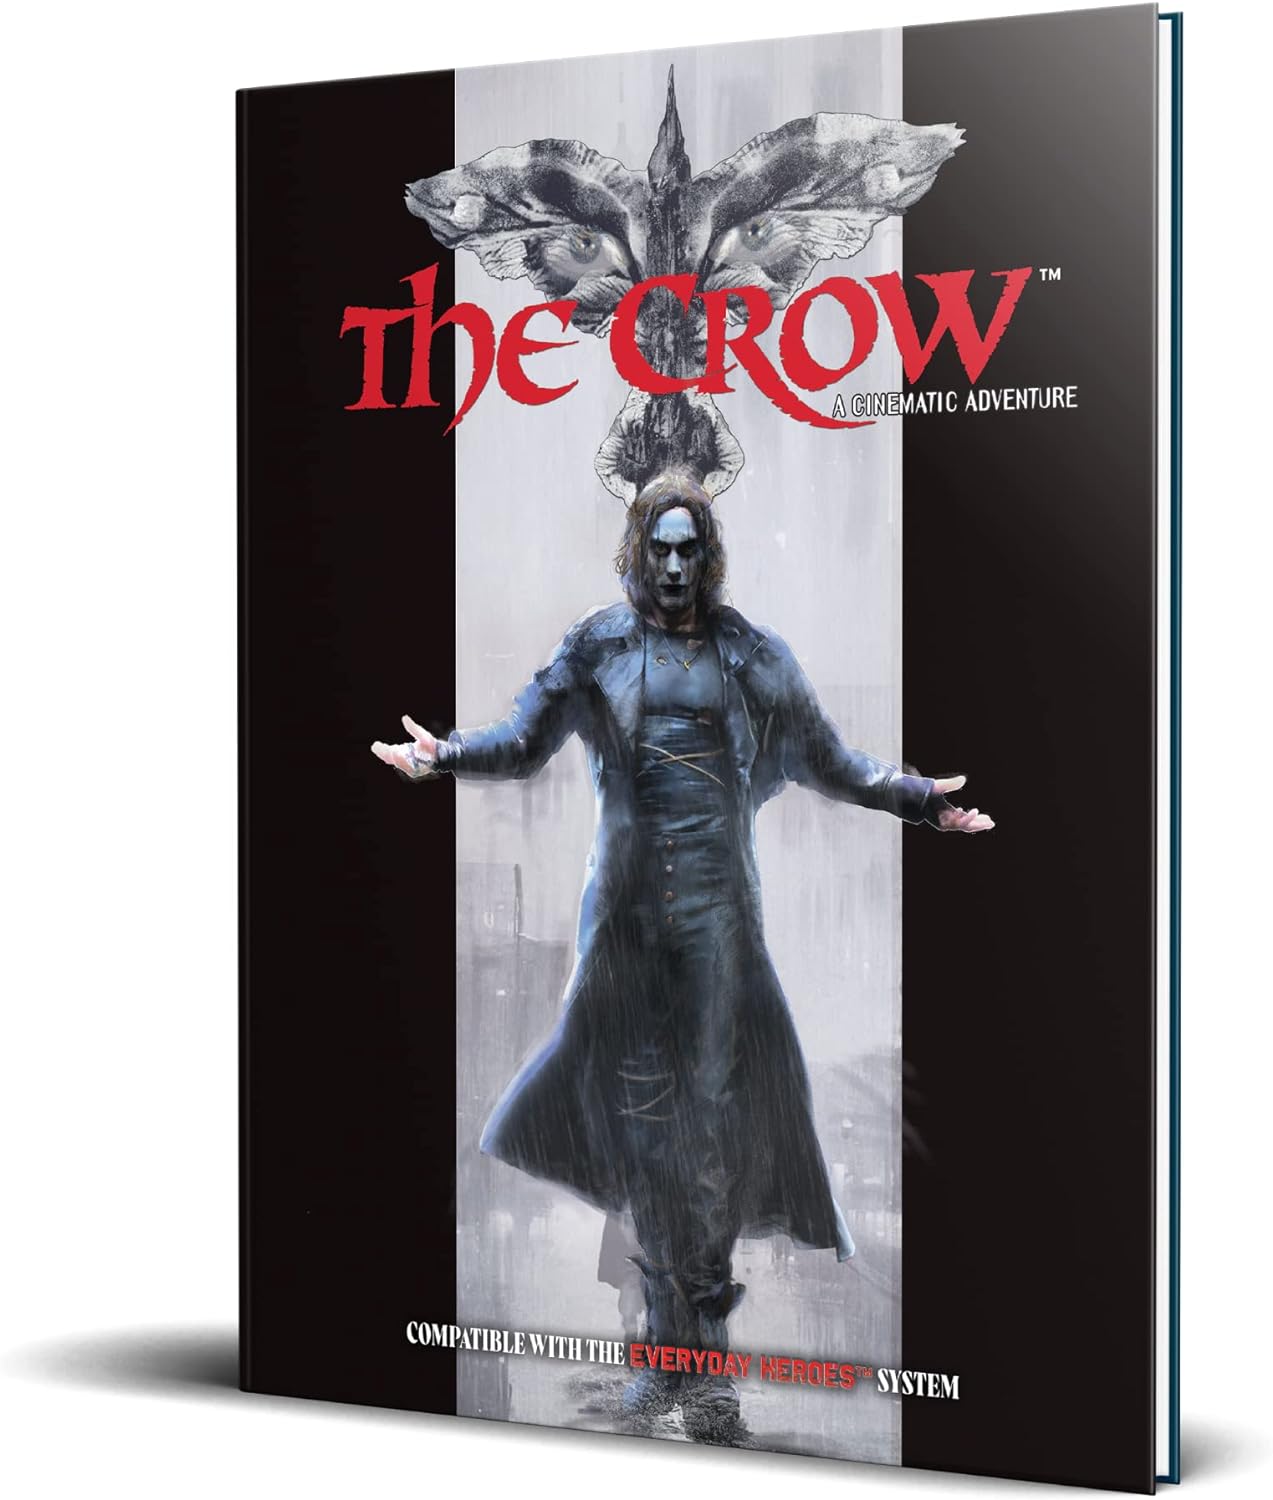 Cinematic Adventure: The Crow-Expansion RPG Book | CCGPrime